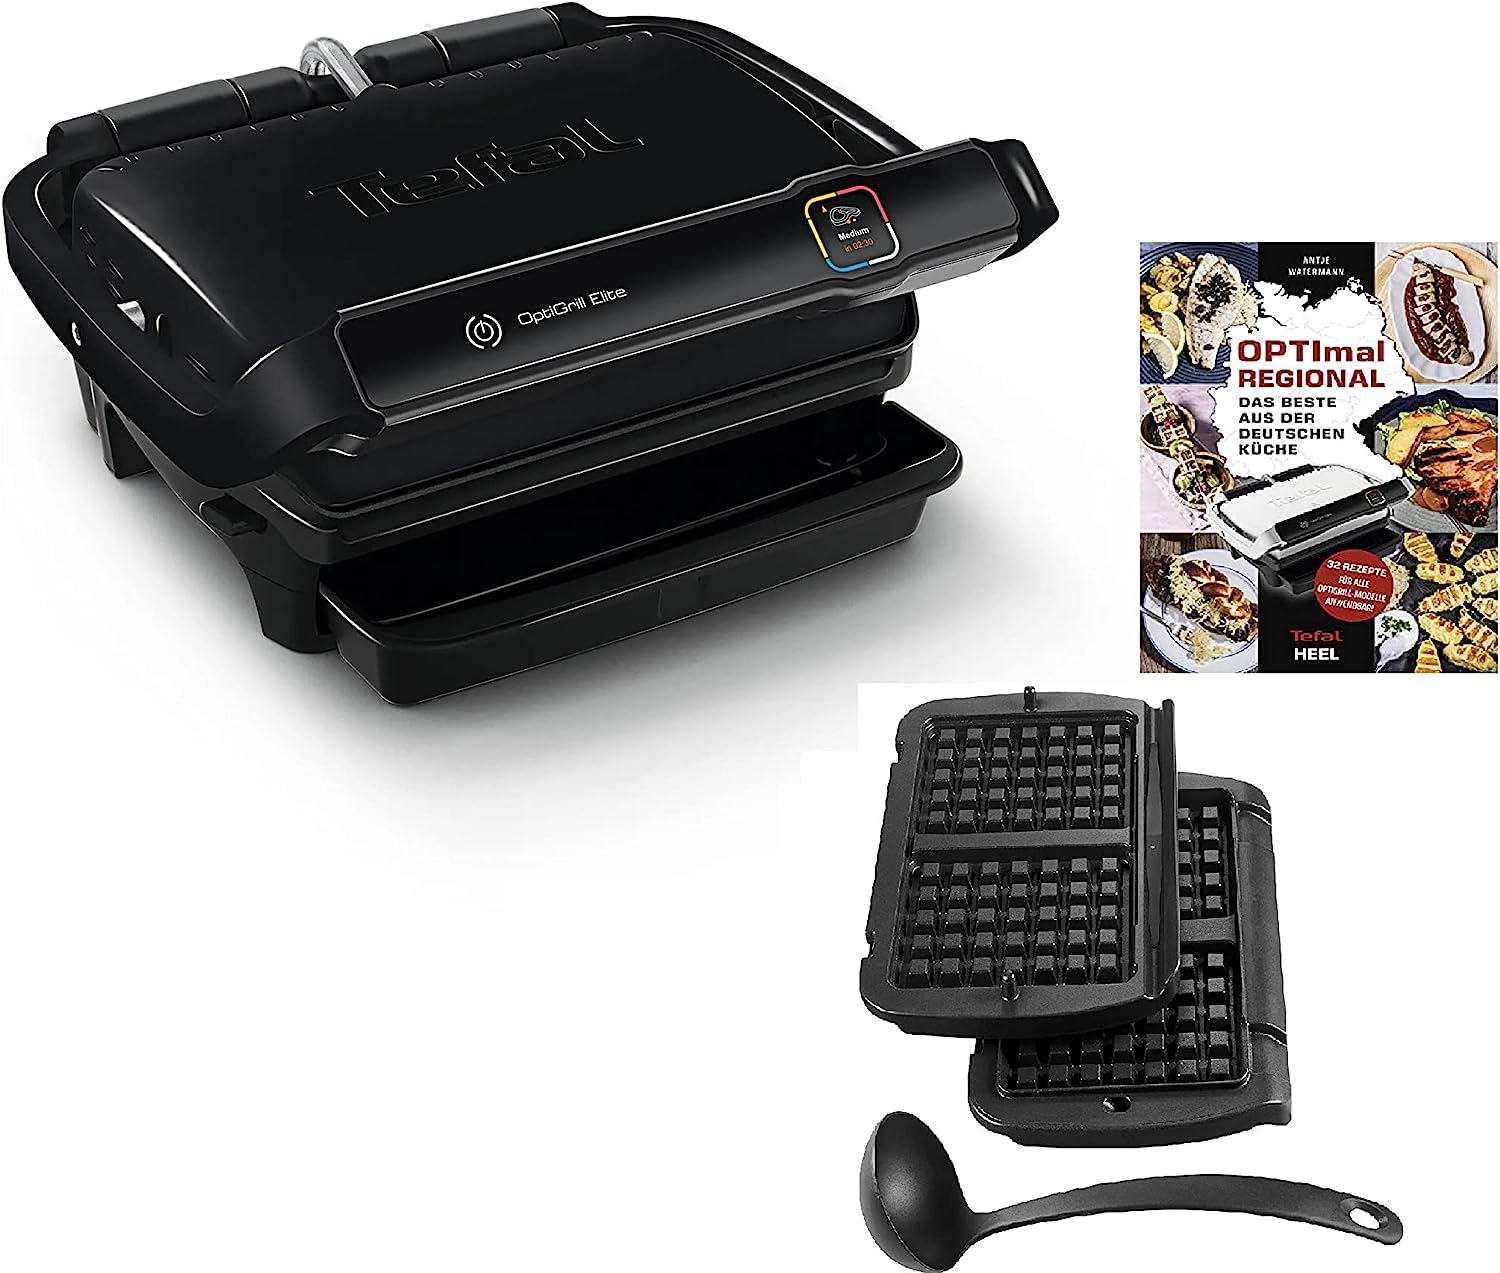 Tefal Optigrill Elite Contact Grill I 2000 Watt I With Waffle Plates, Ladle + Grill Book I Indoor & Outdoor Grill I 12 Automatic Programs I Touch Display I Stainless Steel I Perfect Grilling Results